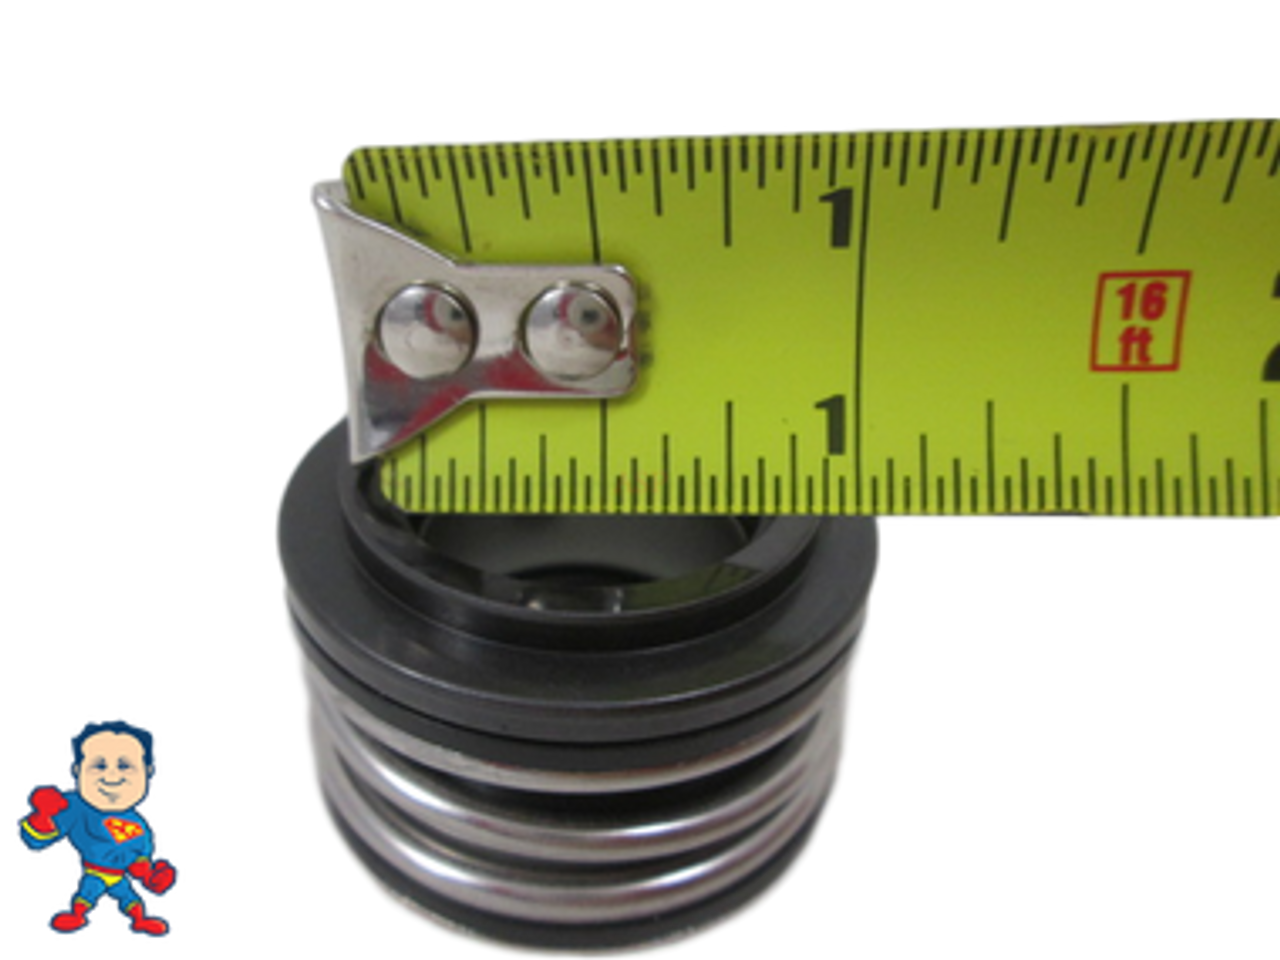 Pump Seal PS-3868 Viton Like a PS-201 (Better) Fits Most Vico, Sta-Rite and Power Right Spa Pumps